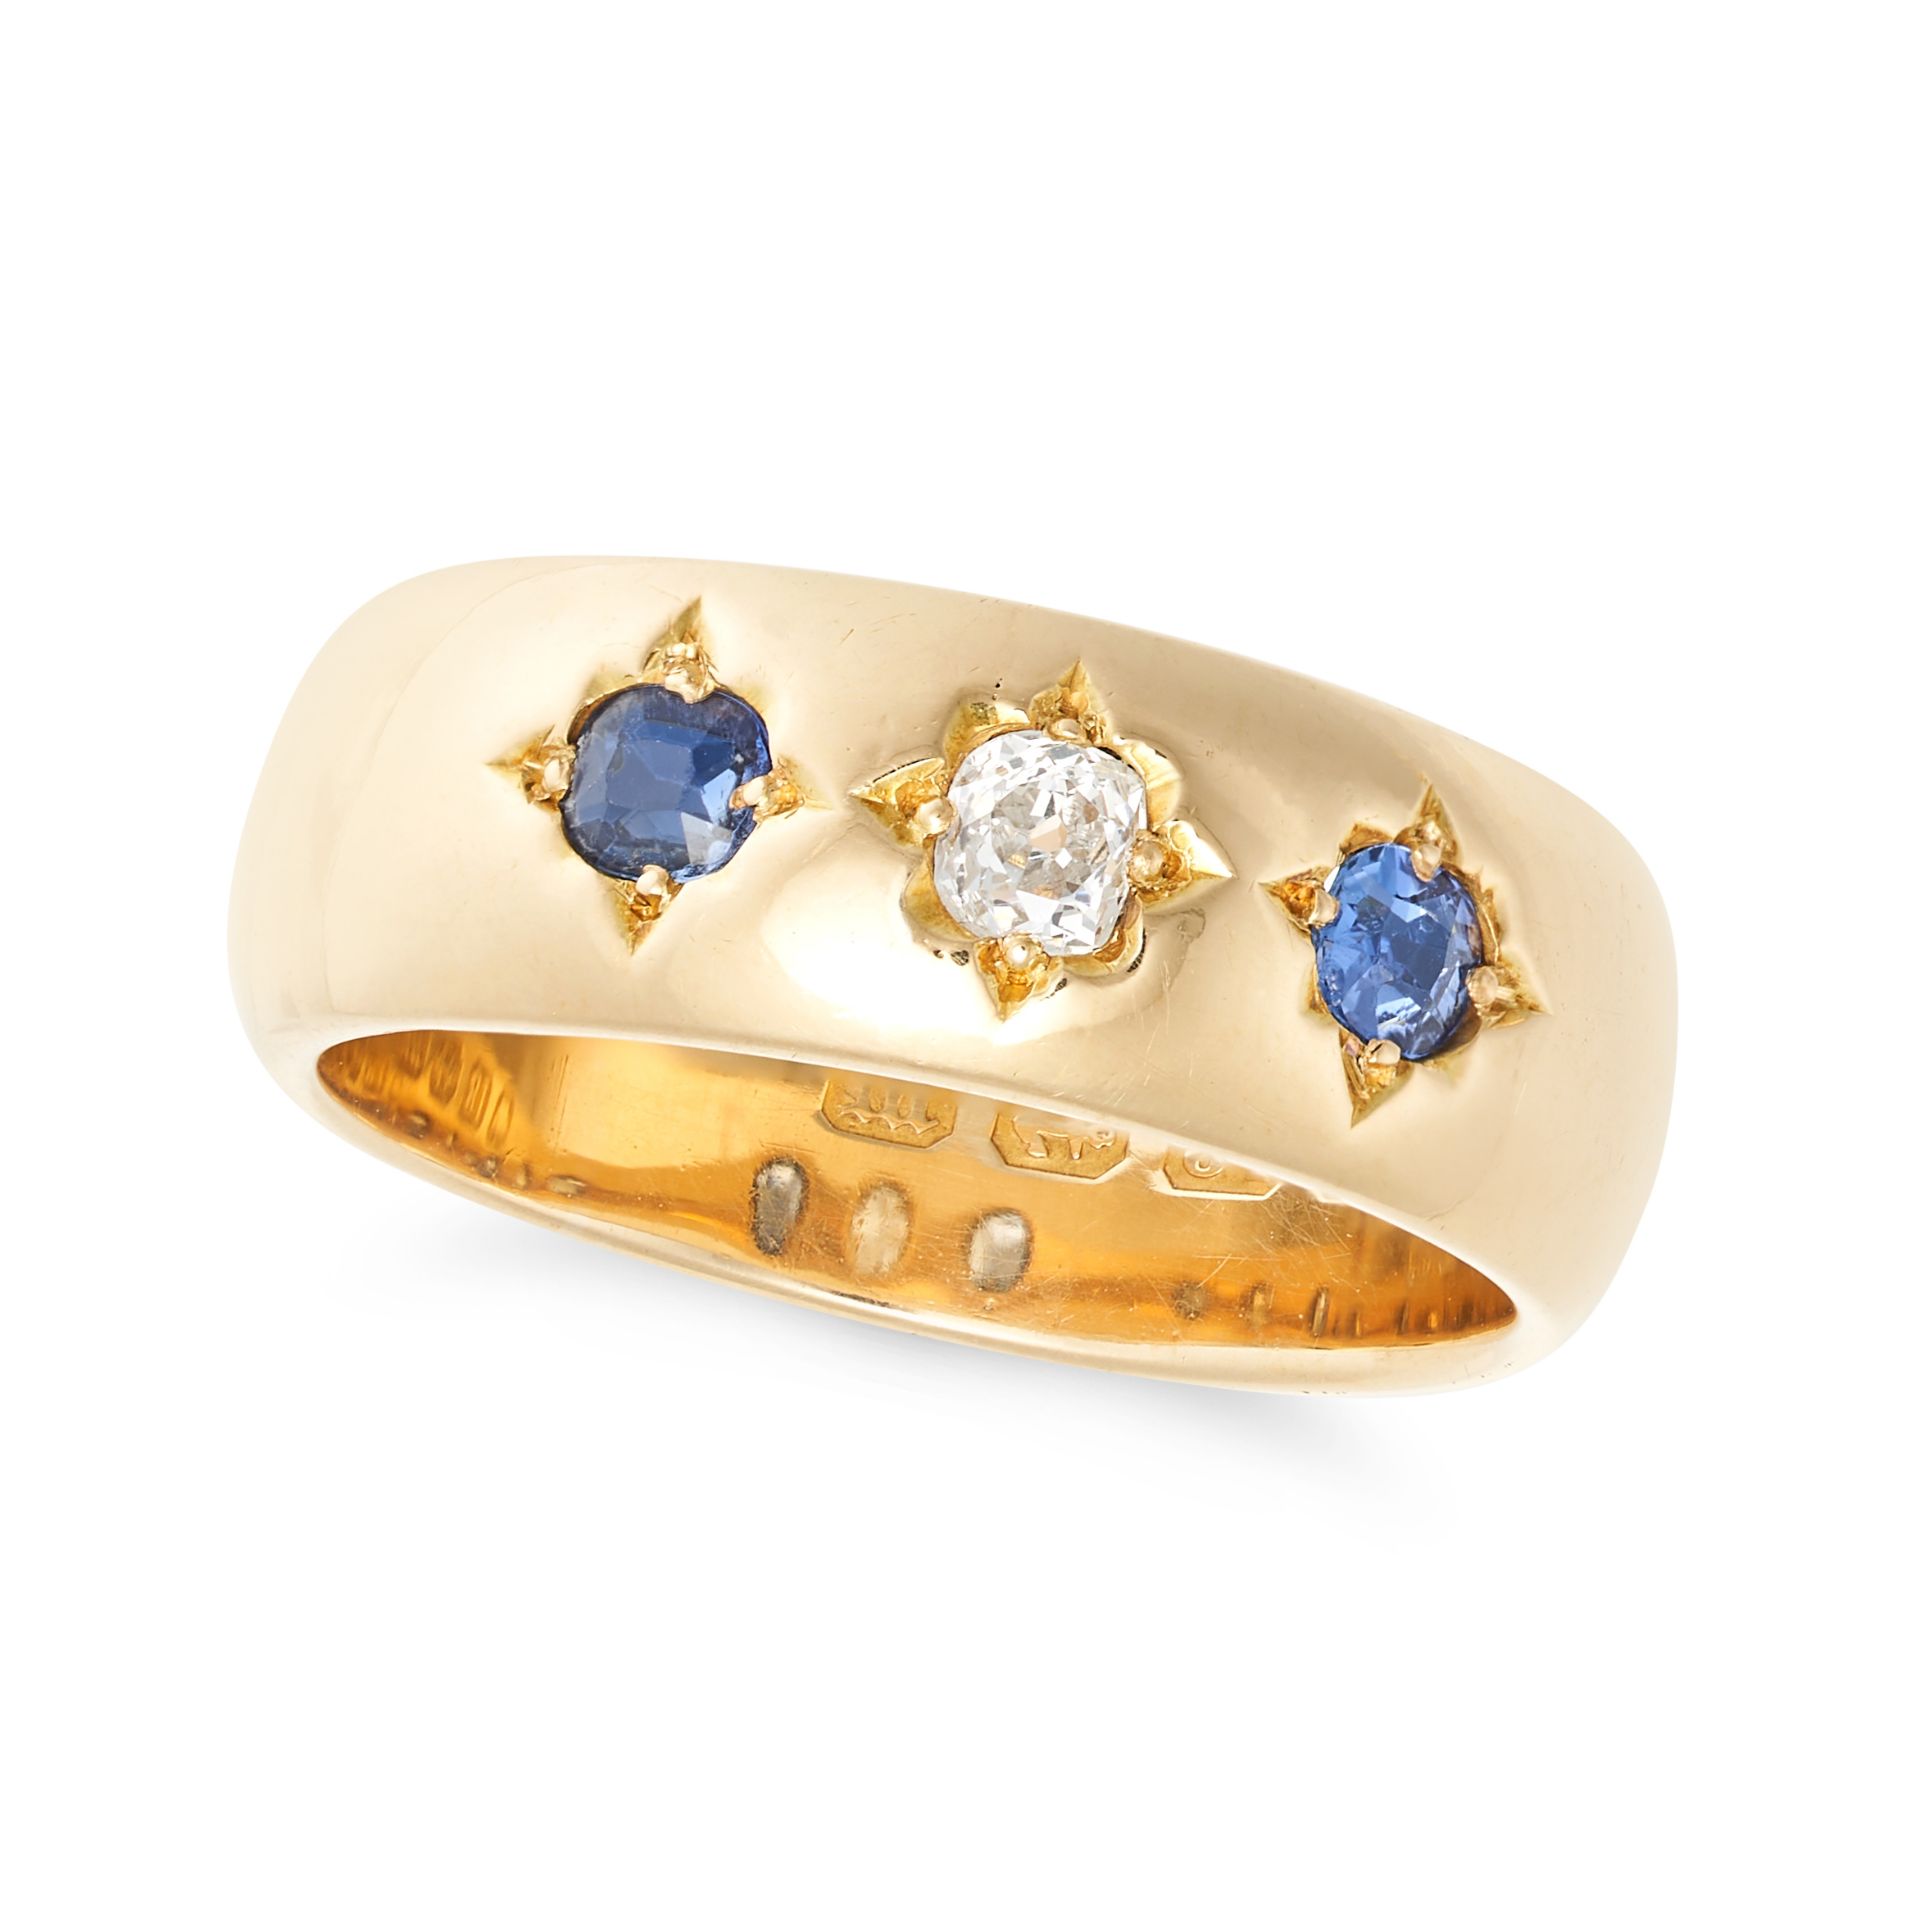 AN ANTIQUE VICTORIAN SAPPHIRE AND DIAMOND GYPSY RING in 18ct yellow gold, set with an old cut dia...